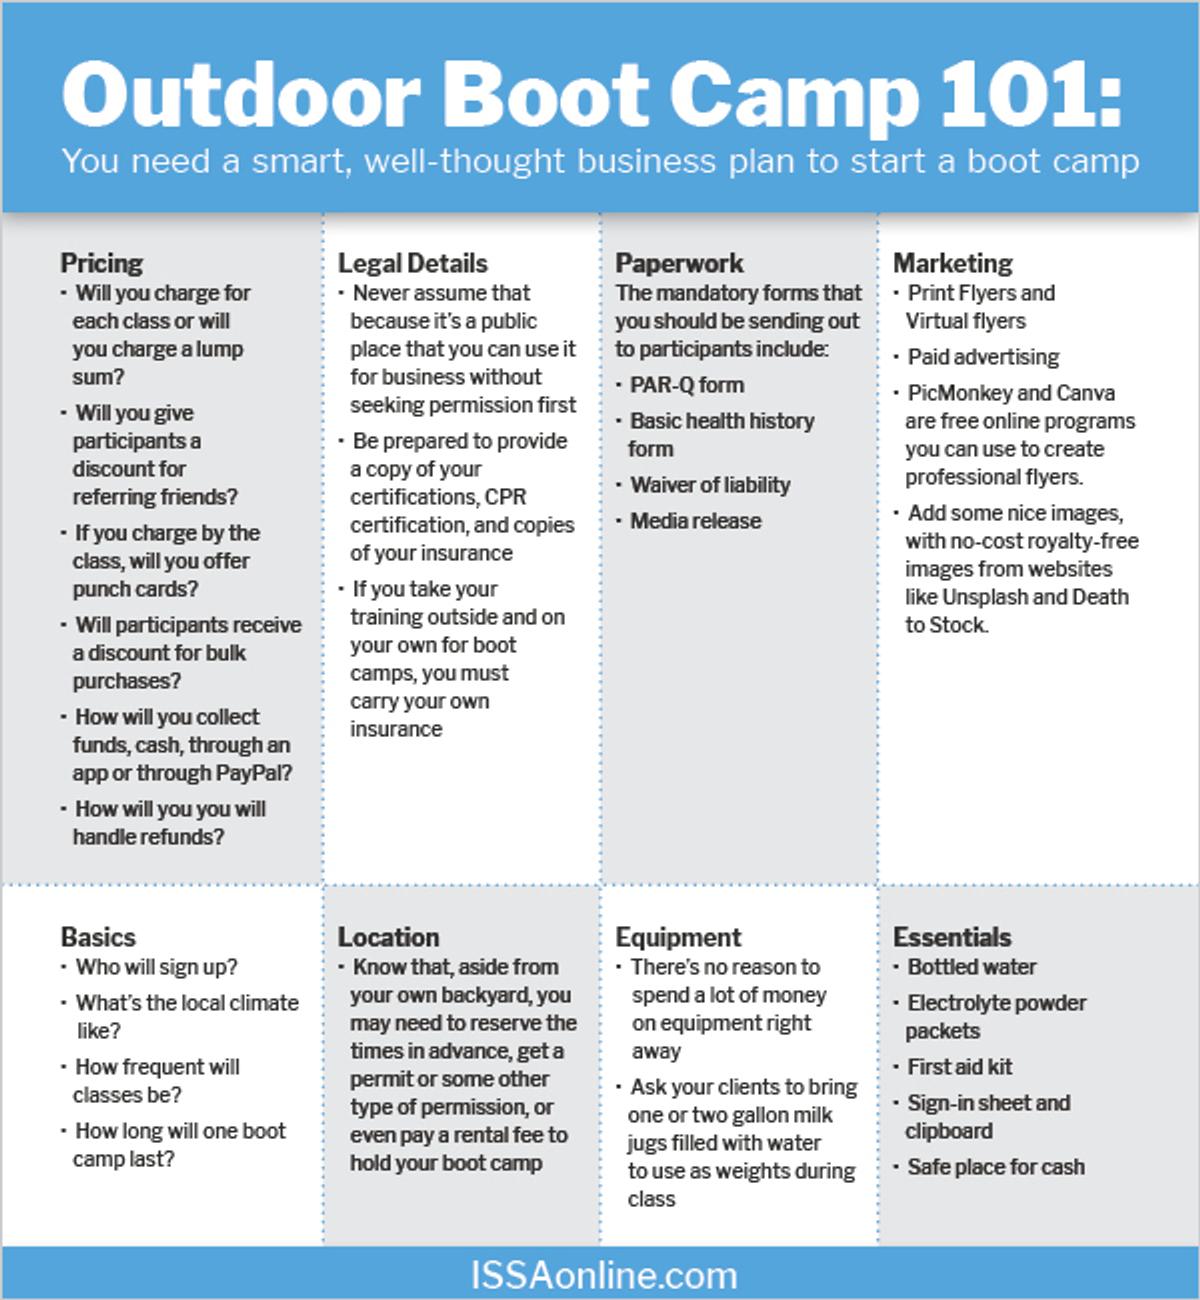 ISSA, International Sports Sciences Association, Certified Personal Trainer, ISSAonline, Group Fitness, The Ultimate Guide to Starting a training Boot Camp, Boot Camp 101 Handout